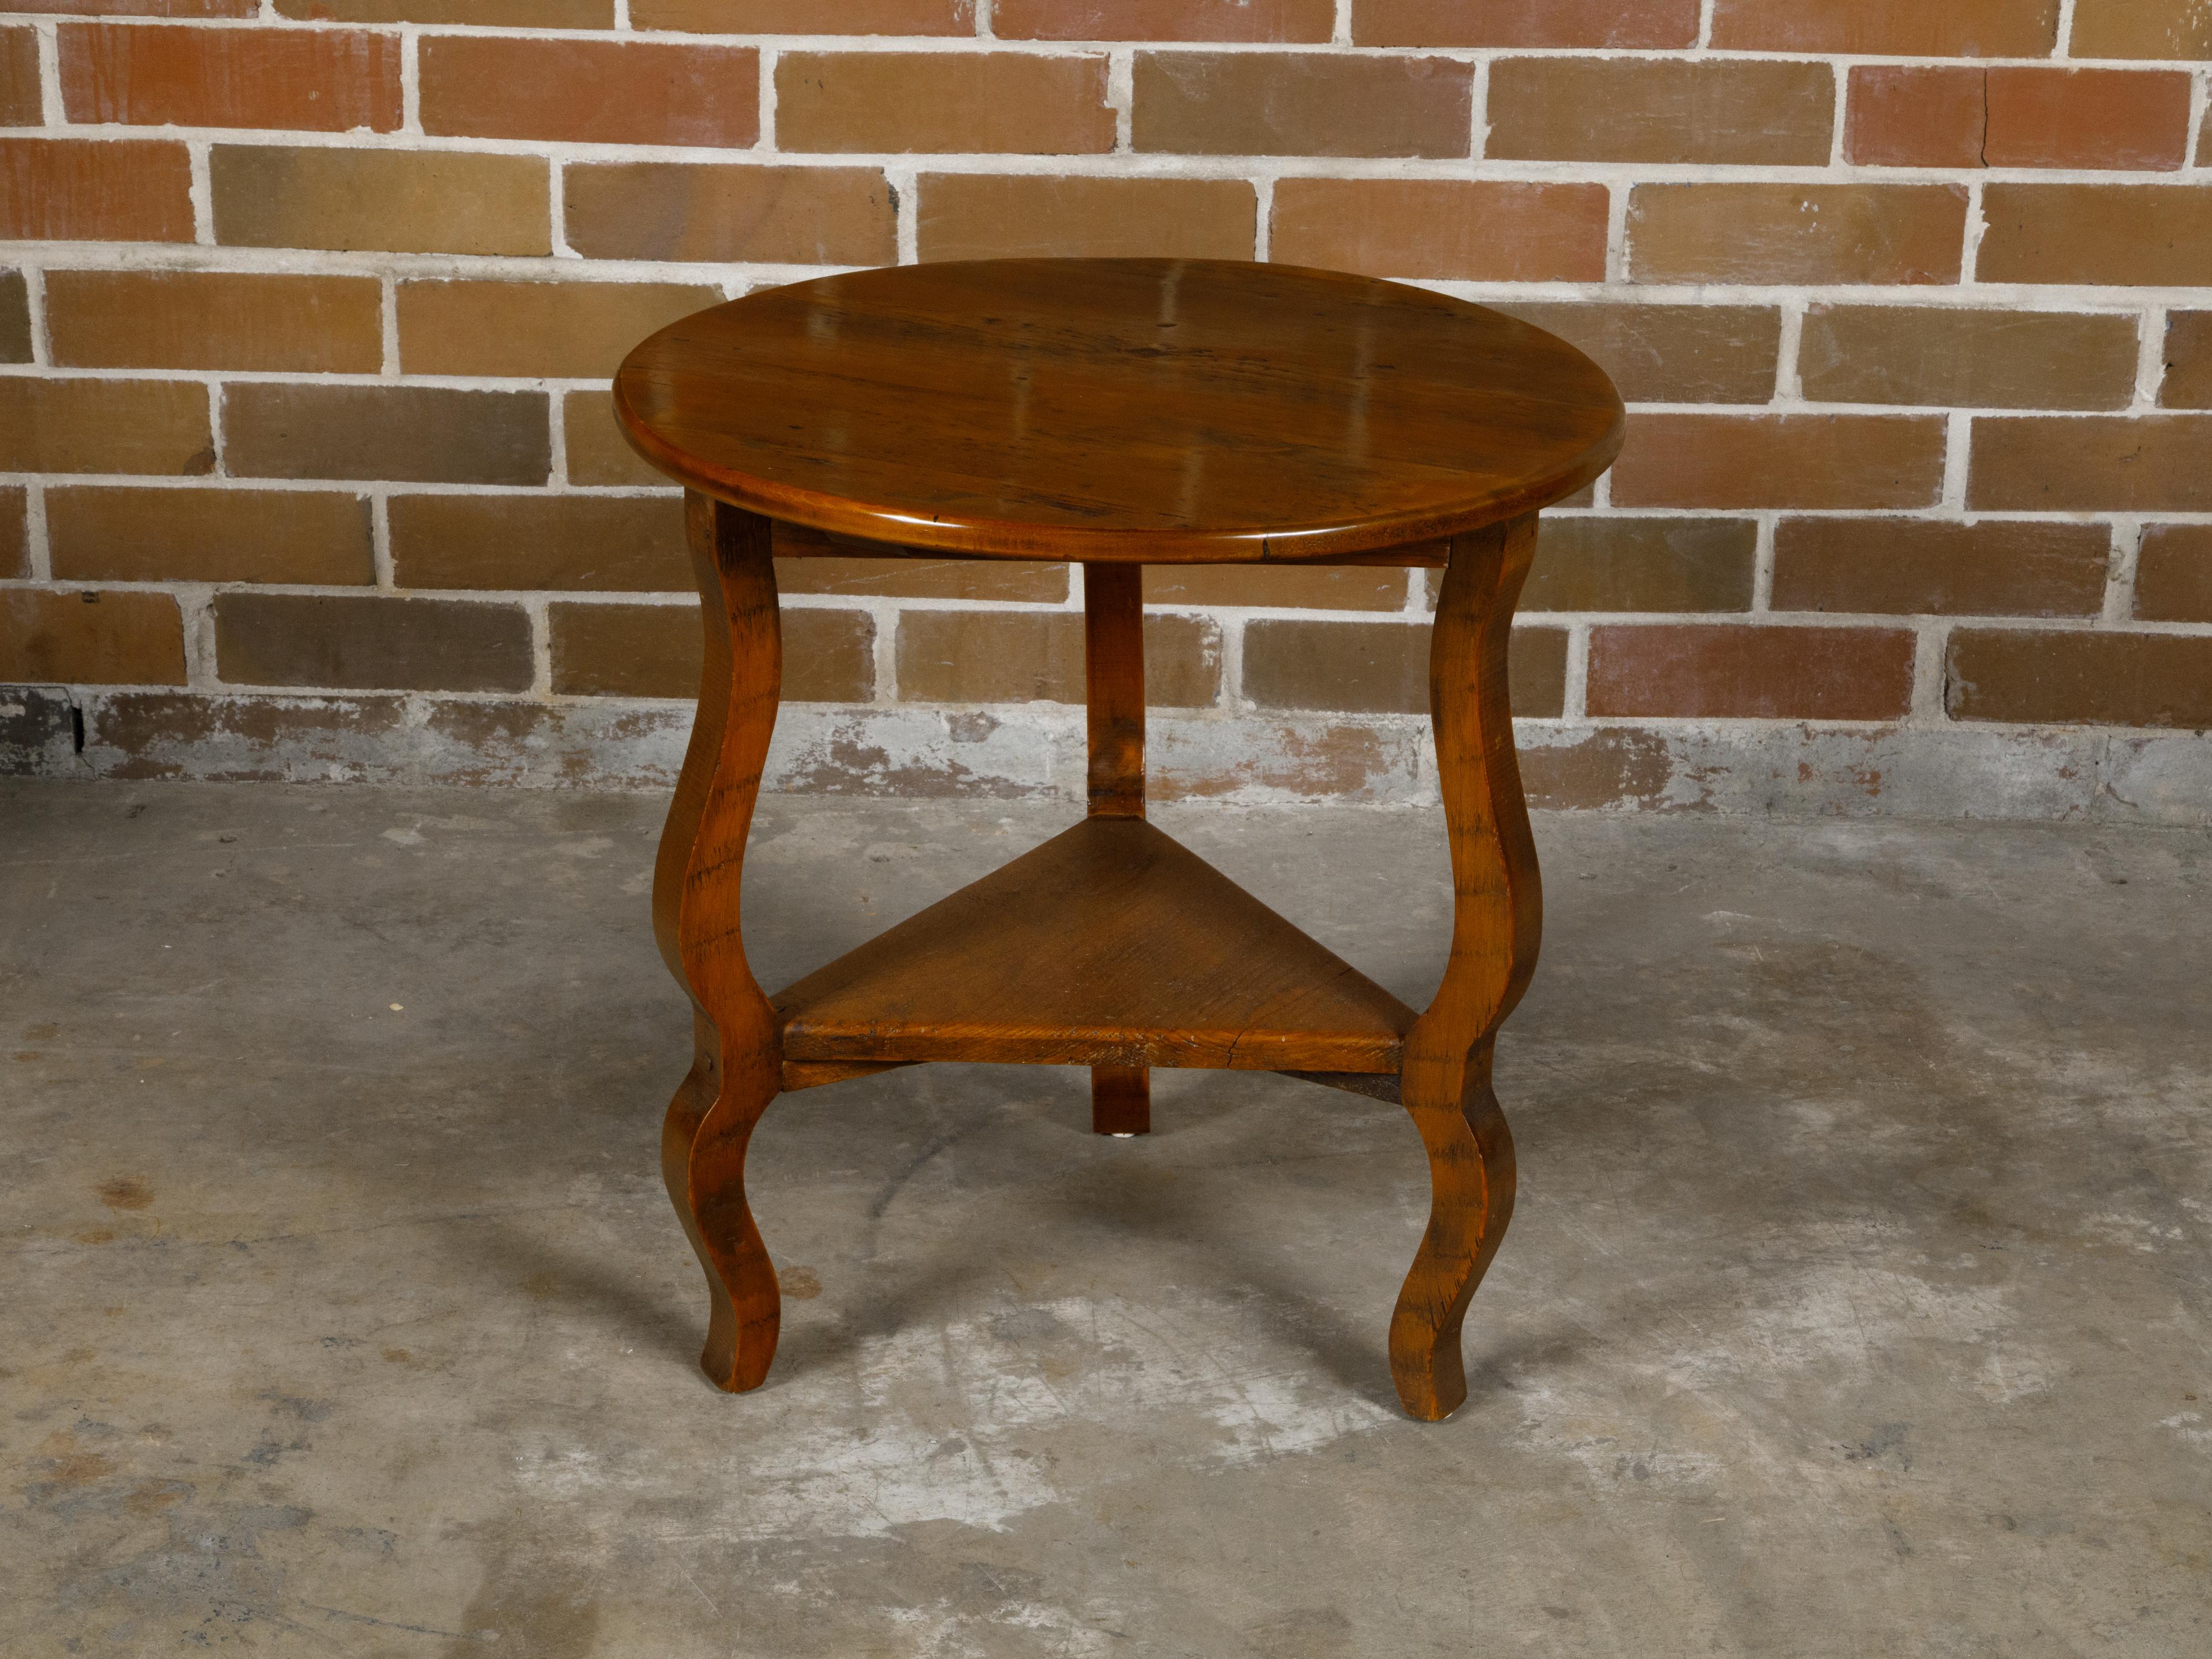 English Pine Side Table with Circular Top, Curving Legs and Triangular Shelf For Sale 6